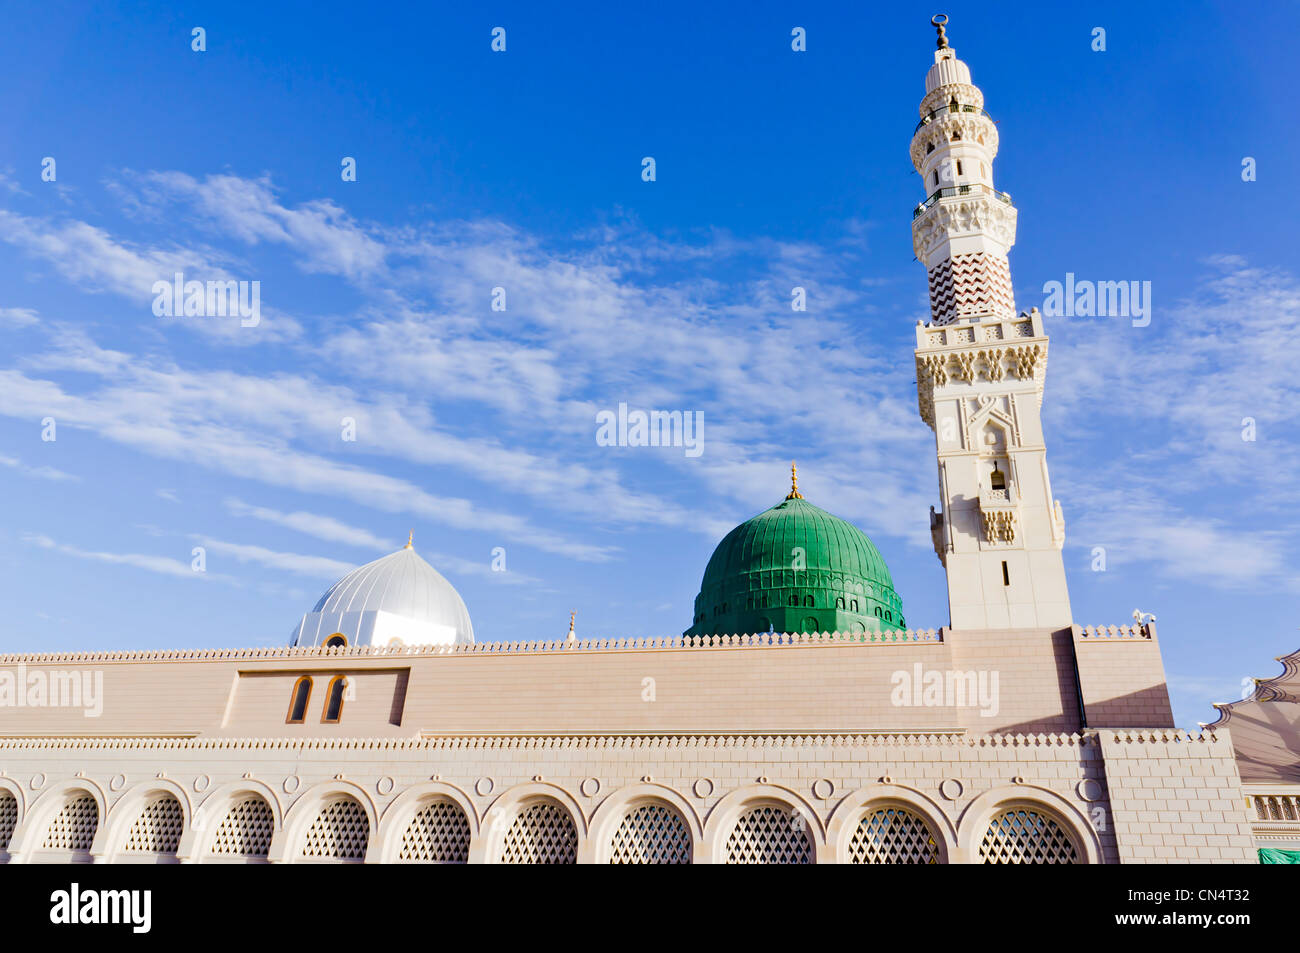 Nabawi Mosque minaret and dome in Medina, Saudi Arabia. The mosque is the second holiest mosque in Islam. Stock Photo